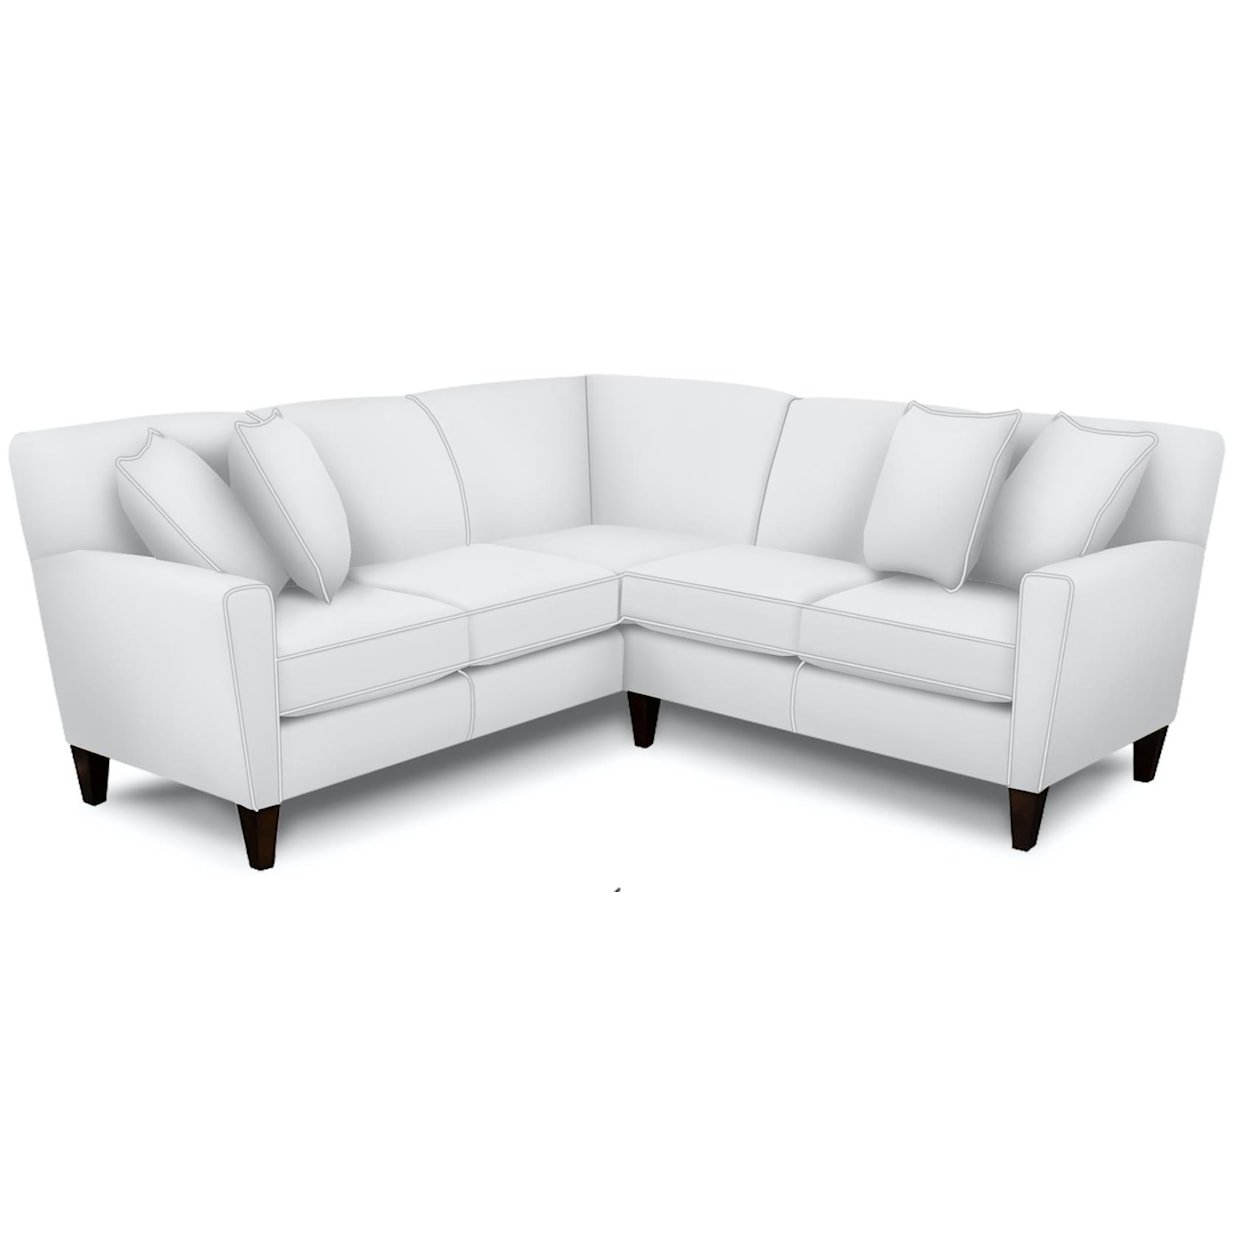 England Collegedale 2 Piece Sectional Sofa